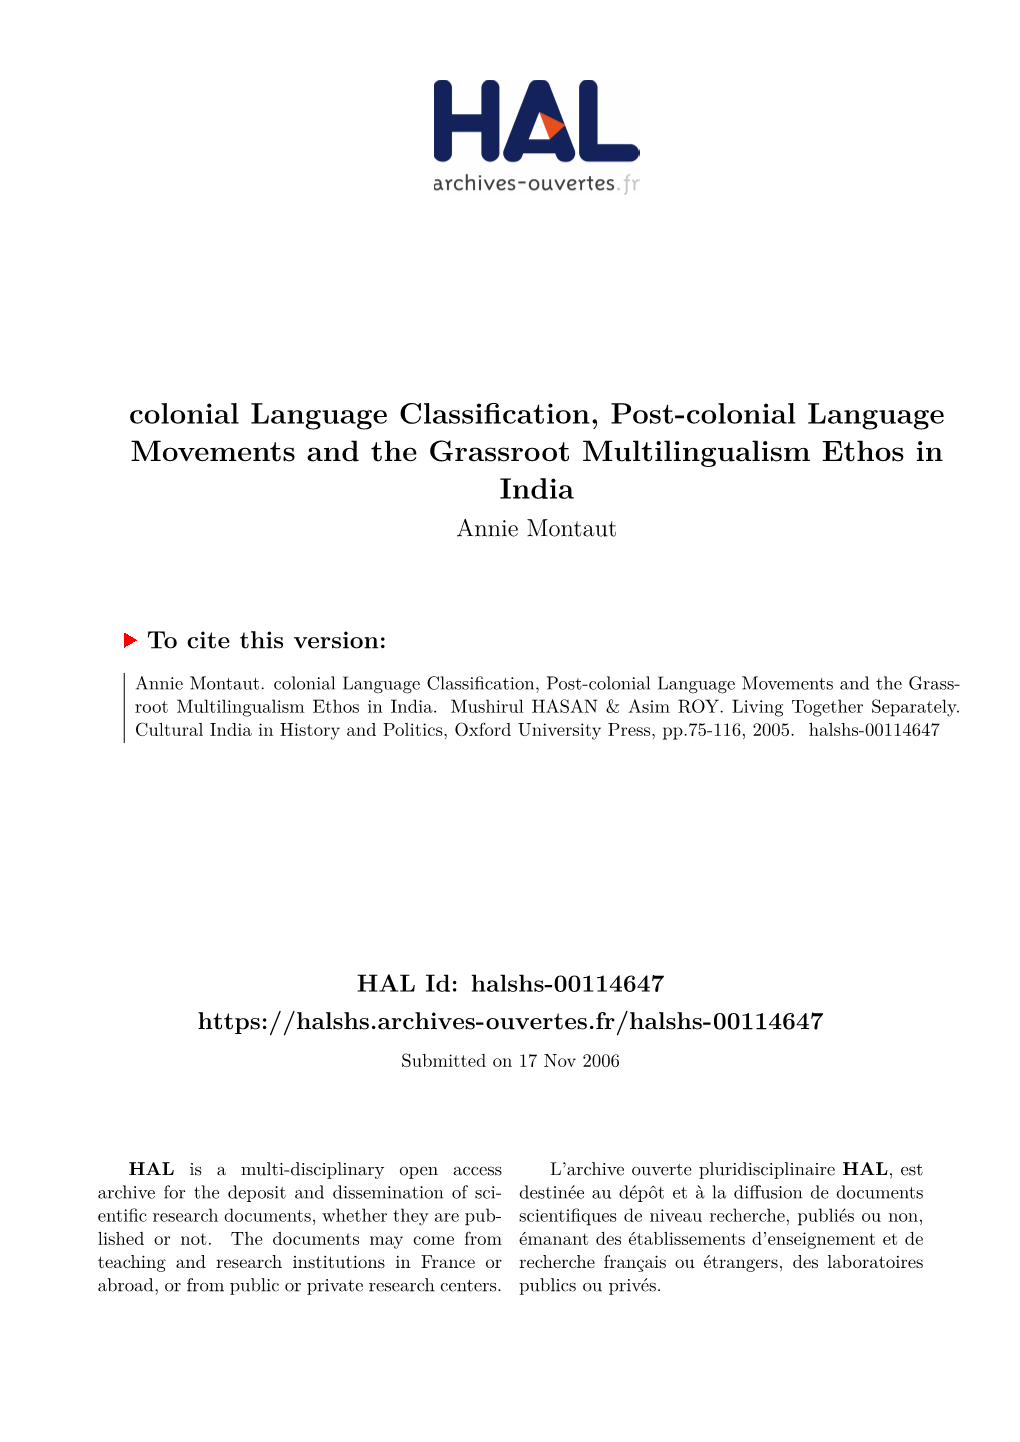 Colonial Language Classification, Post-Colonial Language Movements and the Grassroot Multilingualism Ethos in India Annie Montaut